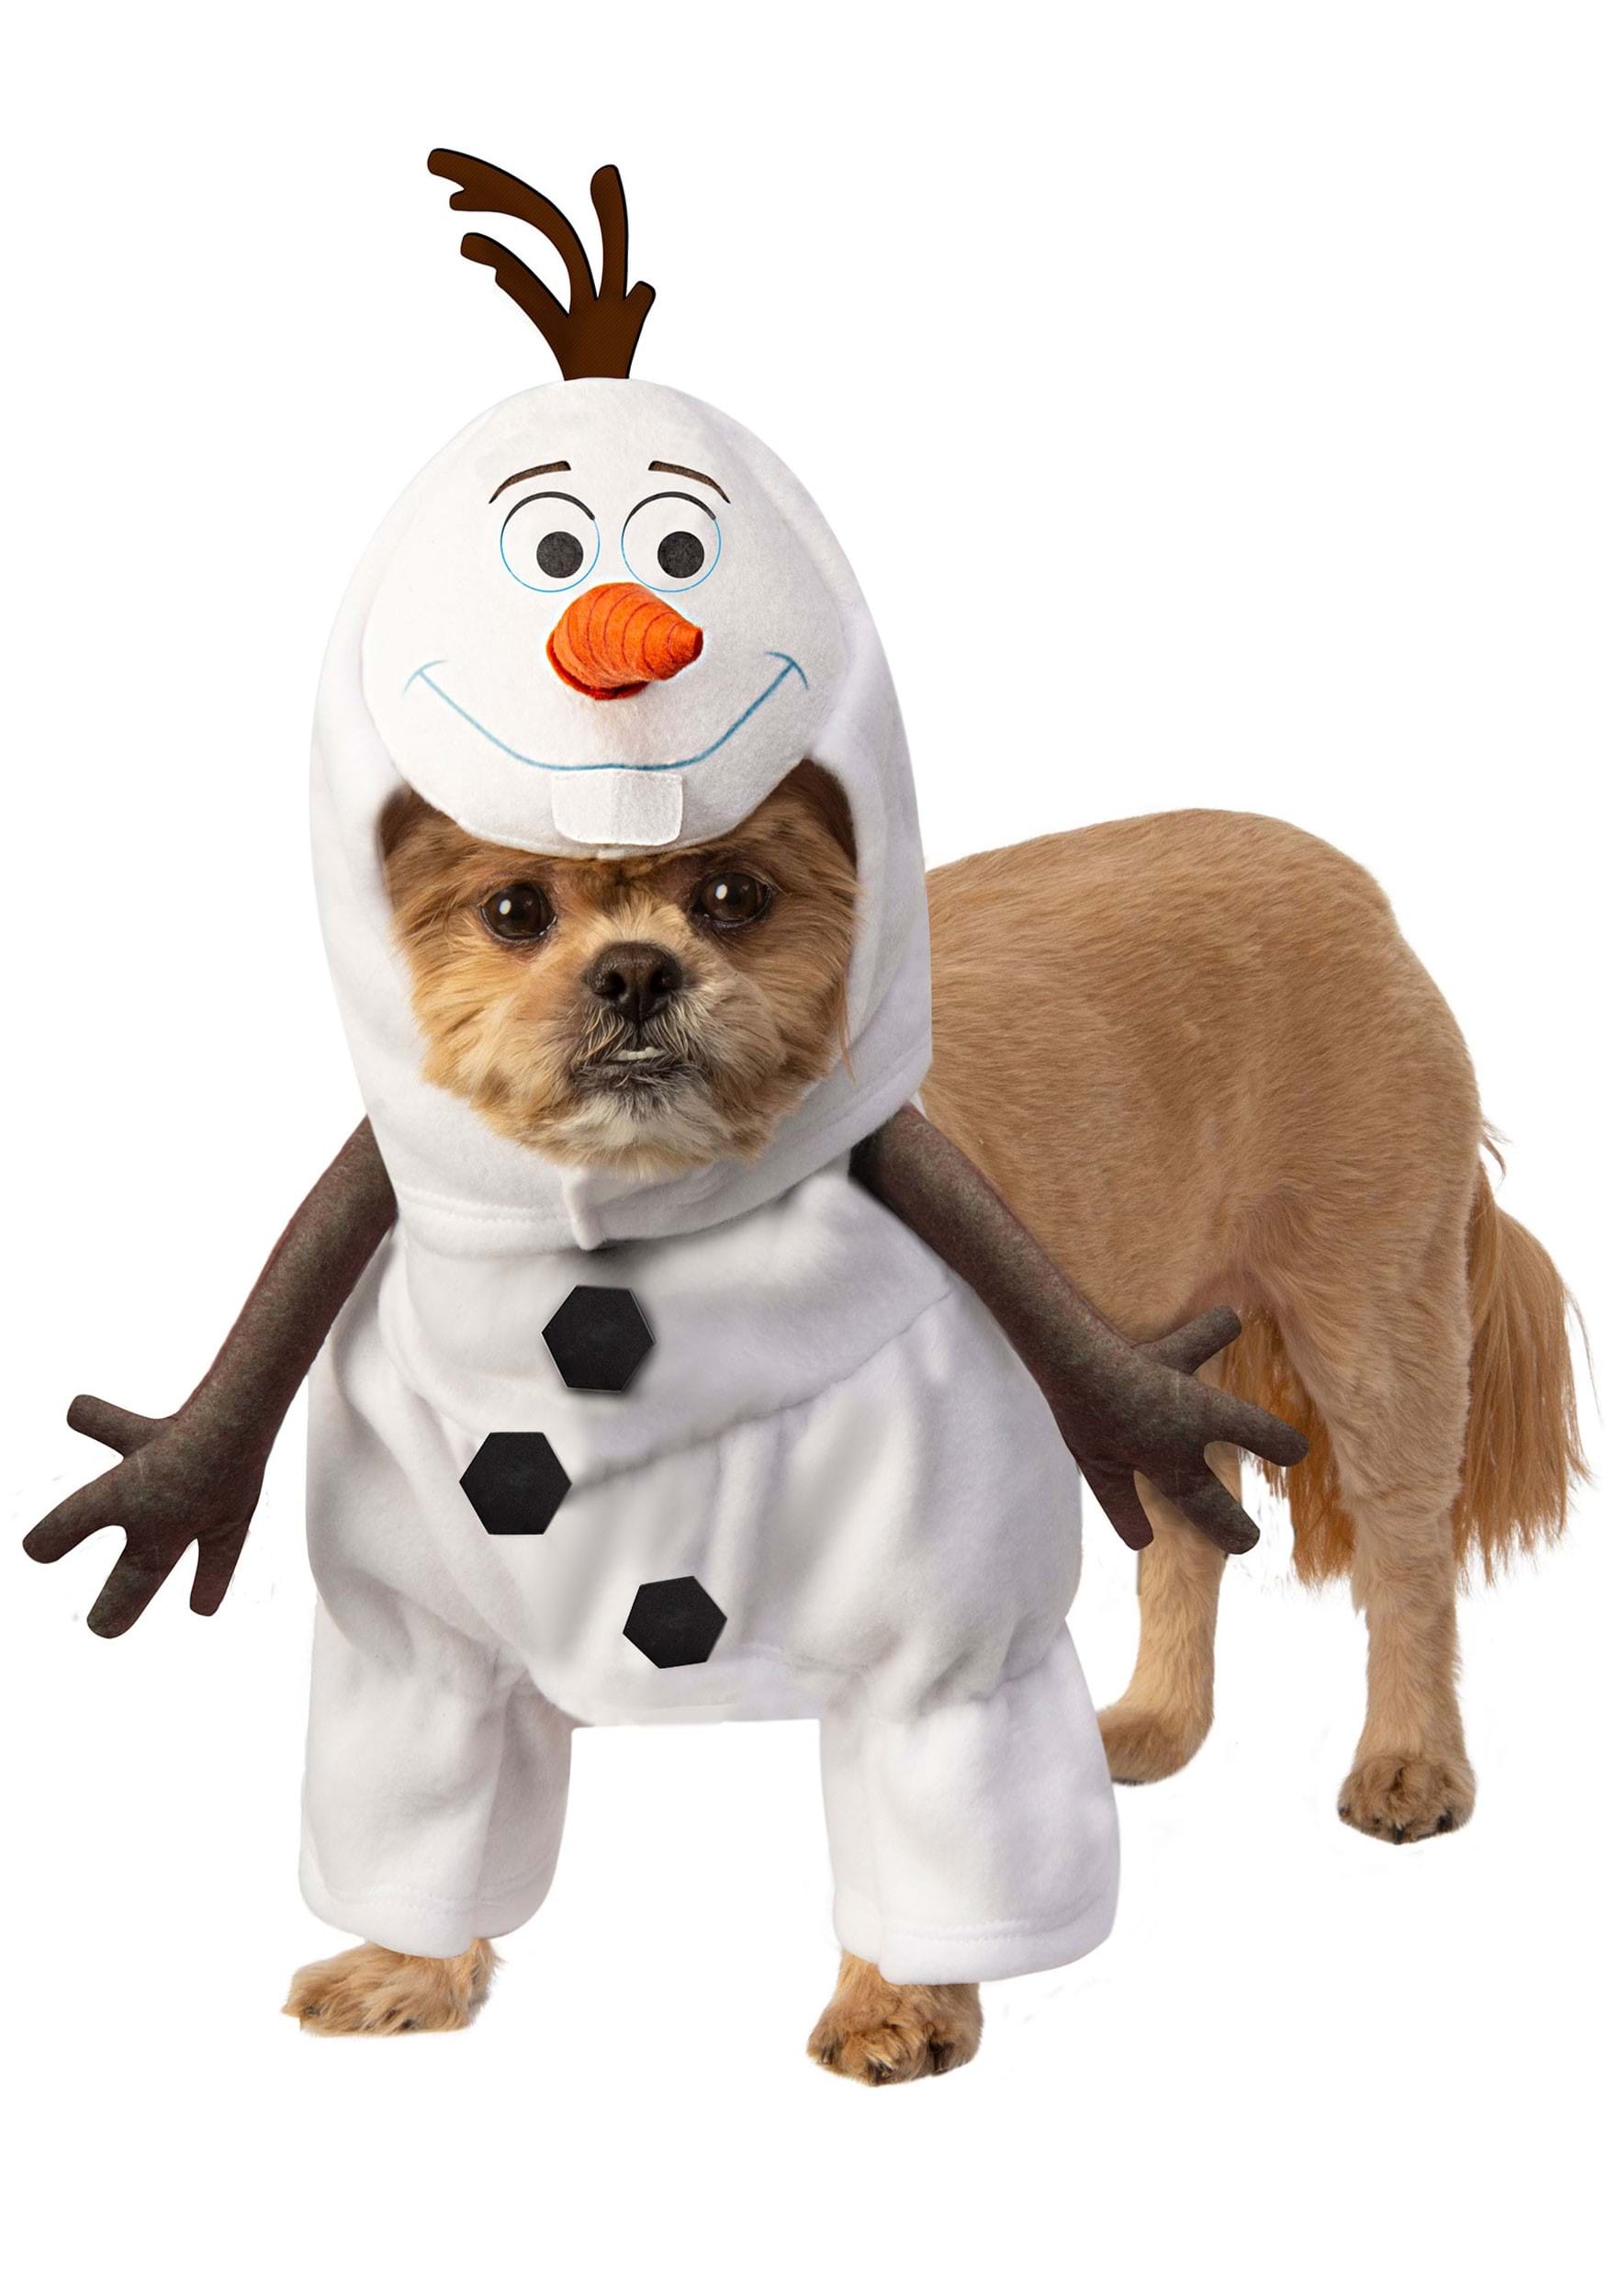 Photos - Fancy Dress Rubies Costume Co. Inc Frozen Olaf Costume for Dogs White RU201022 